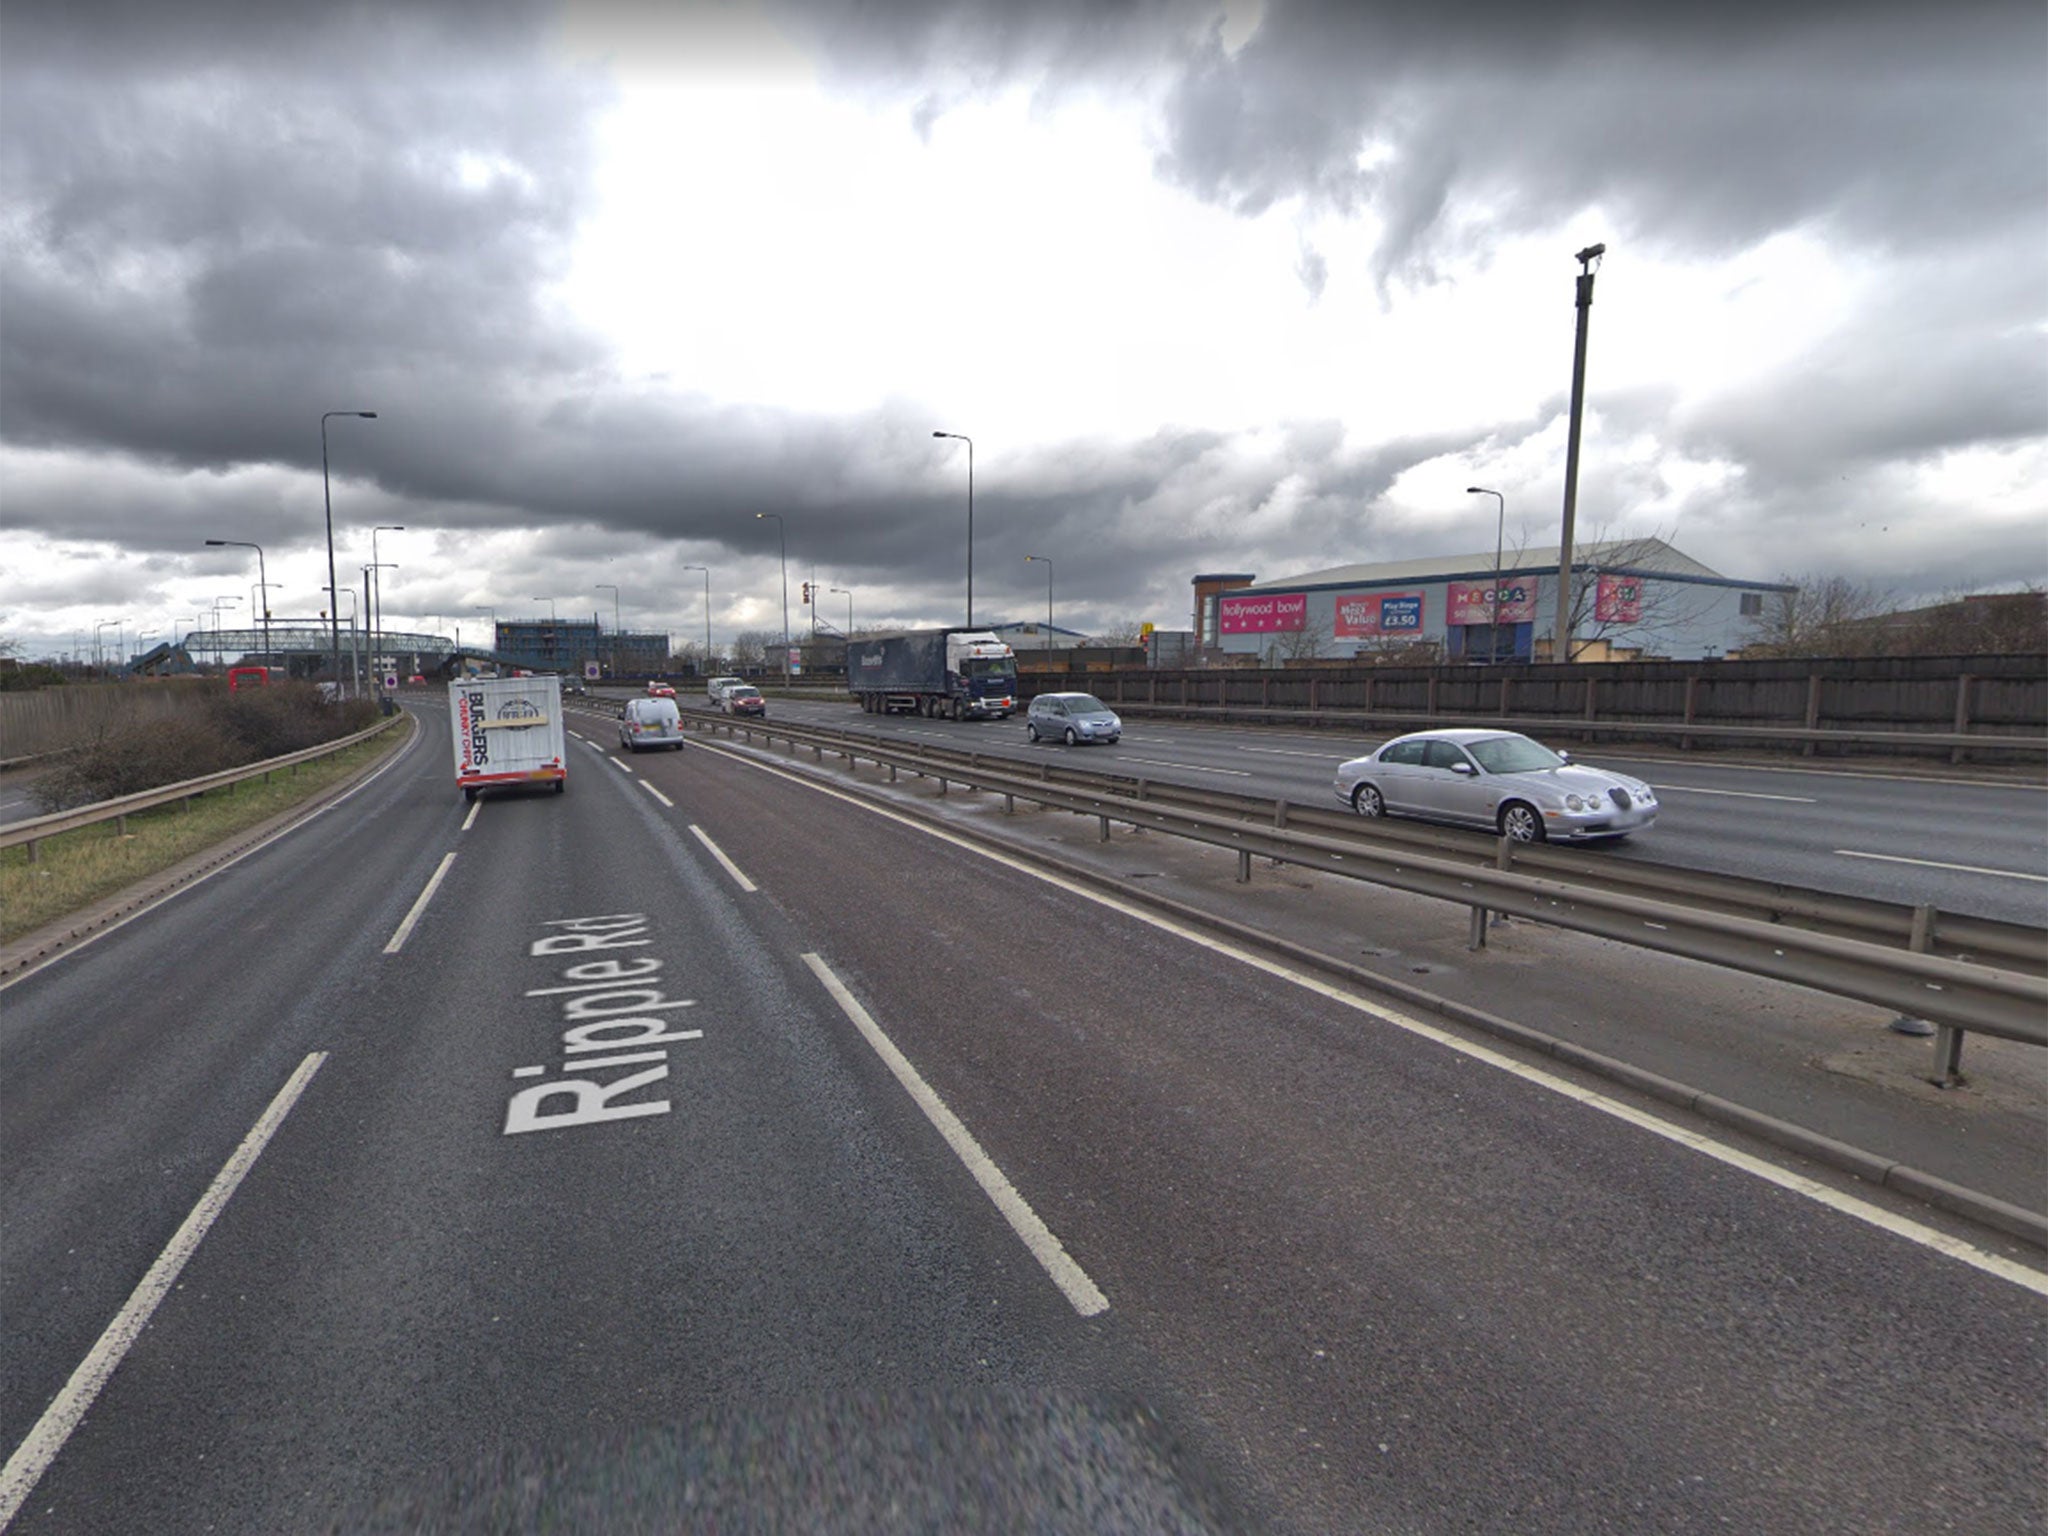 Police were called to the Witch's Hat junction of the A13 in Dagenham early on Monday morning